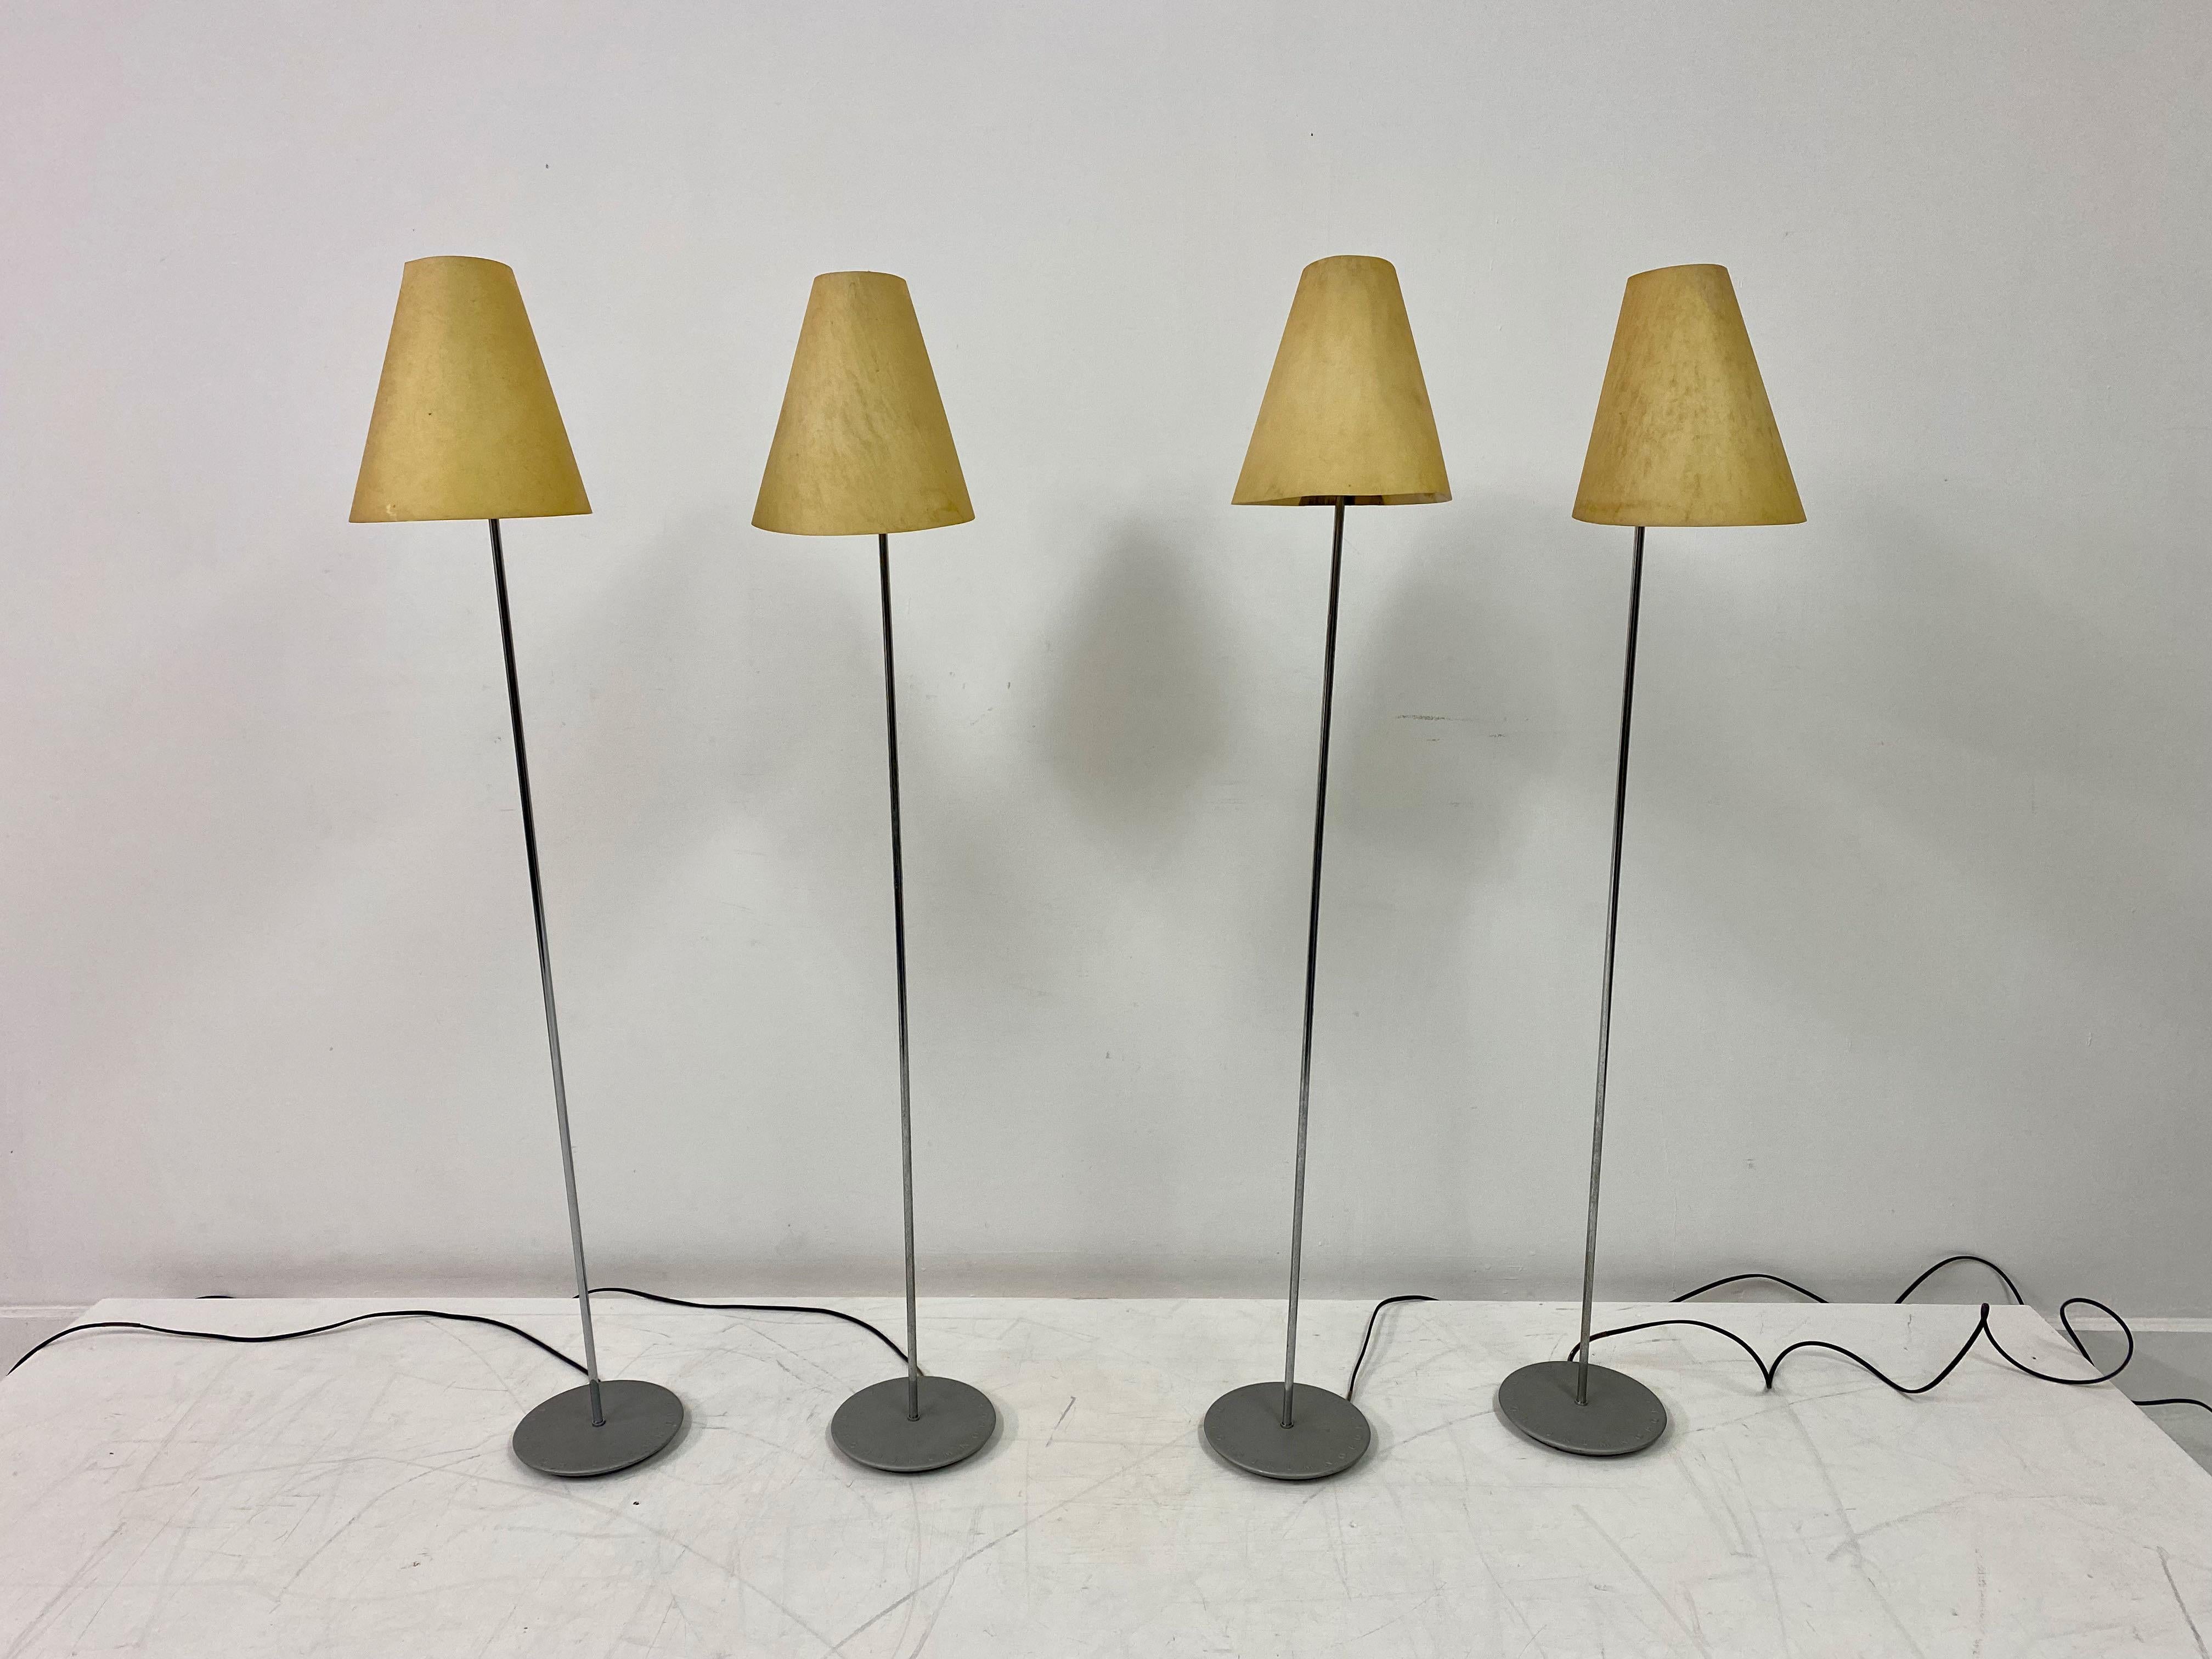 Set of four lamps

Chrome stem

Vellum shades

Mid size height

Toggle switch

Cast aluminium base with pressed letters

Probably Italian mid/late 20th century.